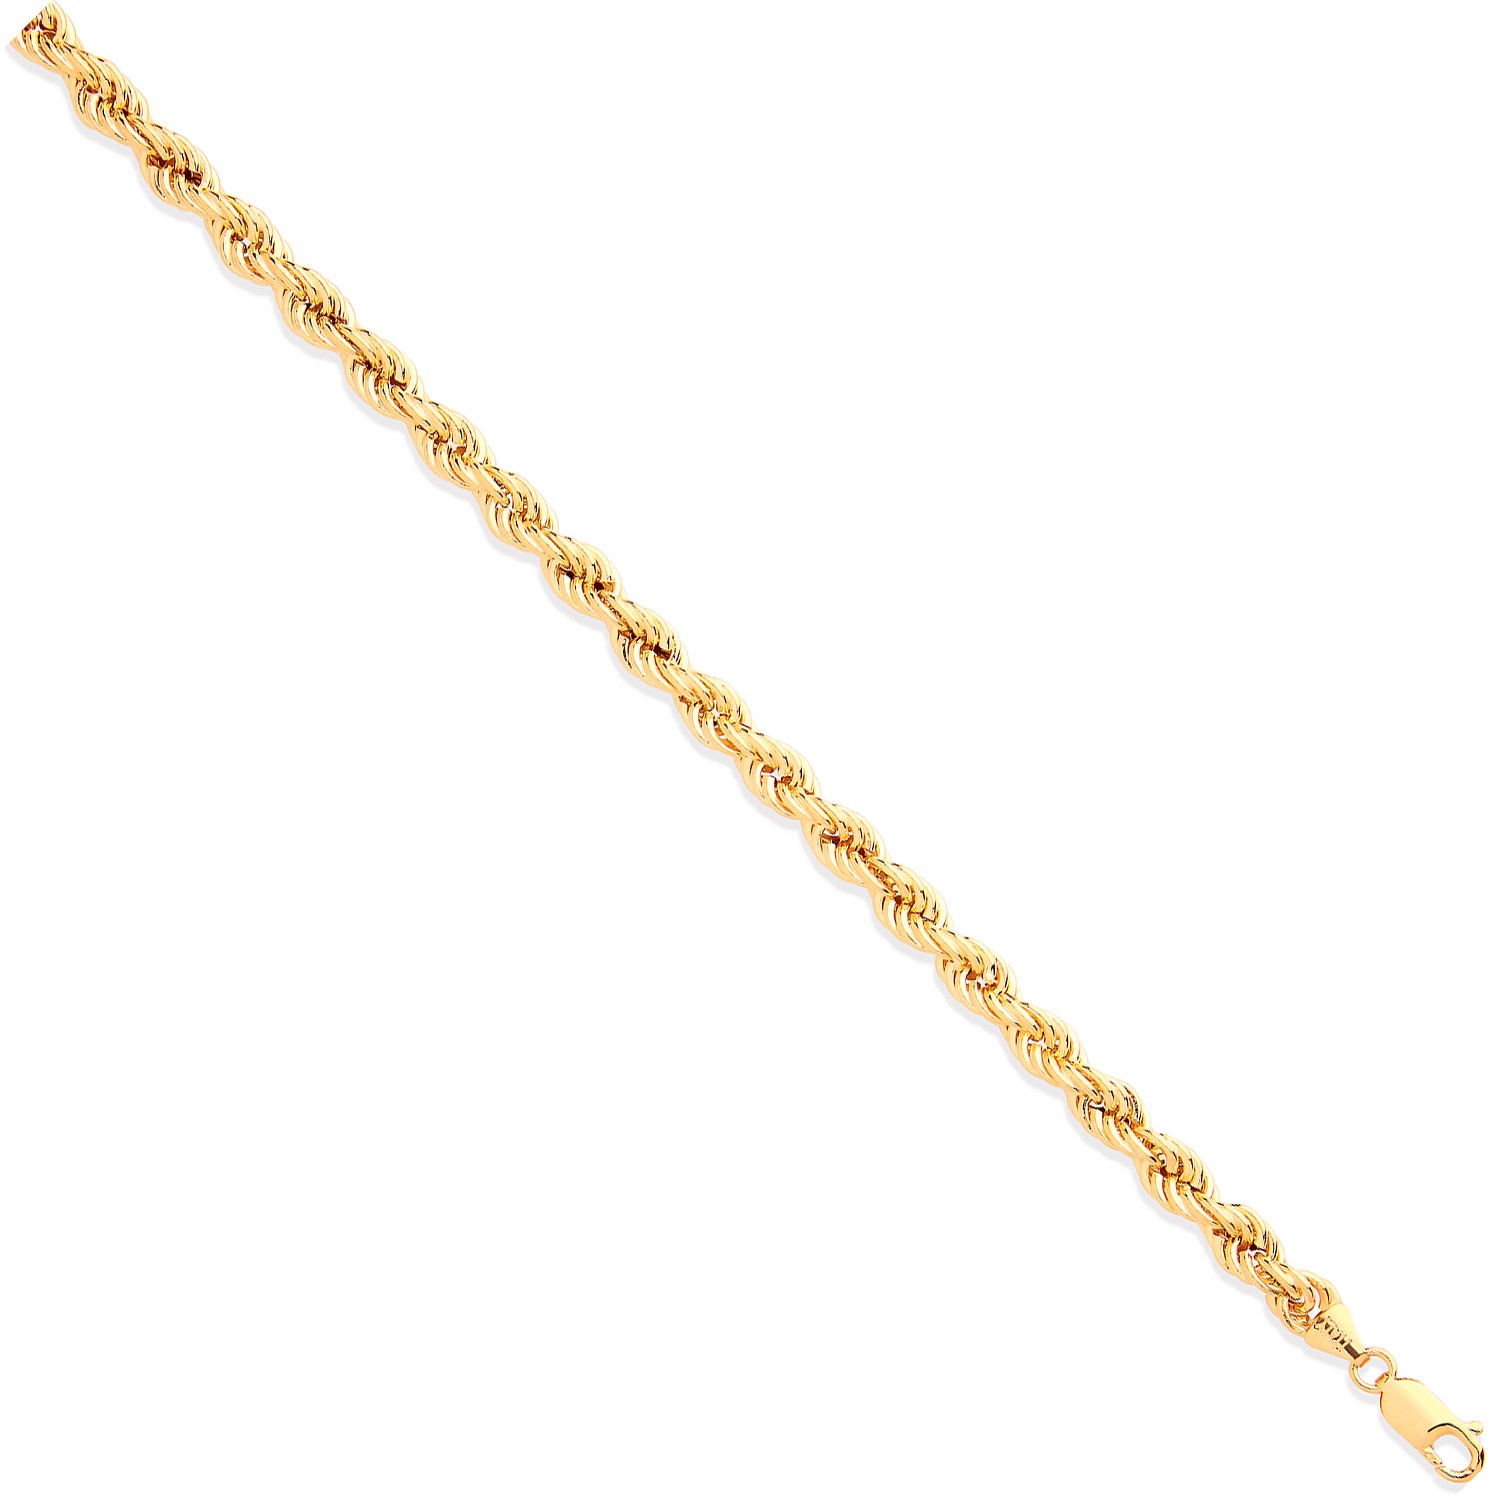 Y/G 6.3mm Hollow Rope Chain